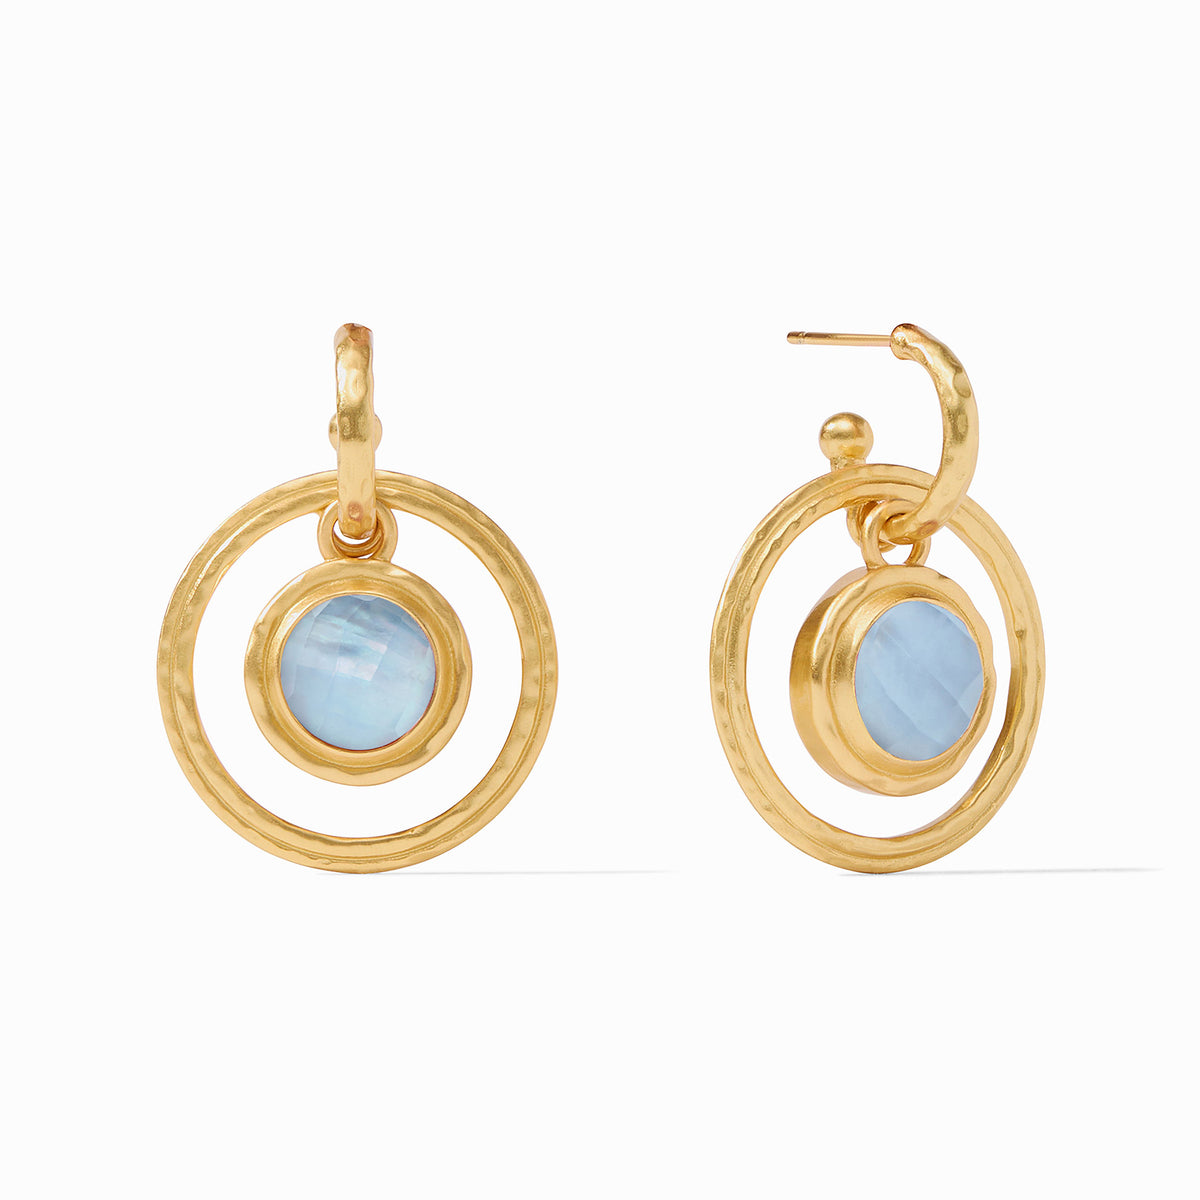 Julie Vos - Astor 6-in-1 Charm Earring, Iridescent Chalcedony Blue